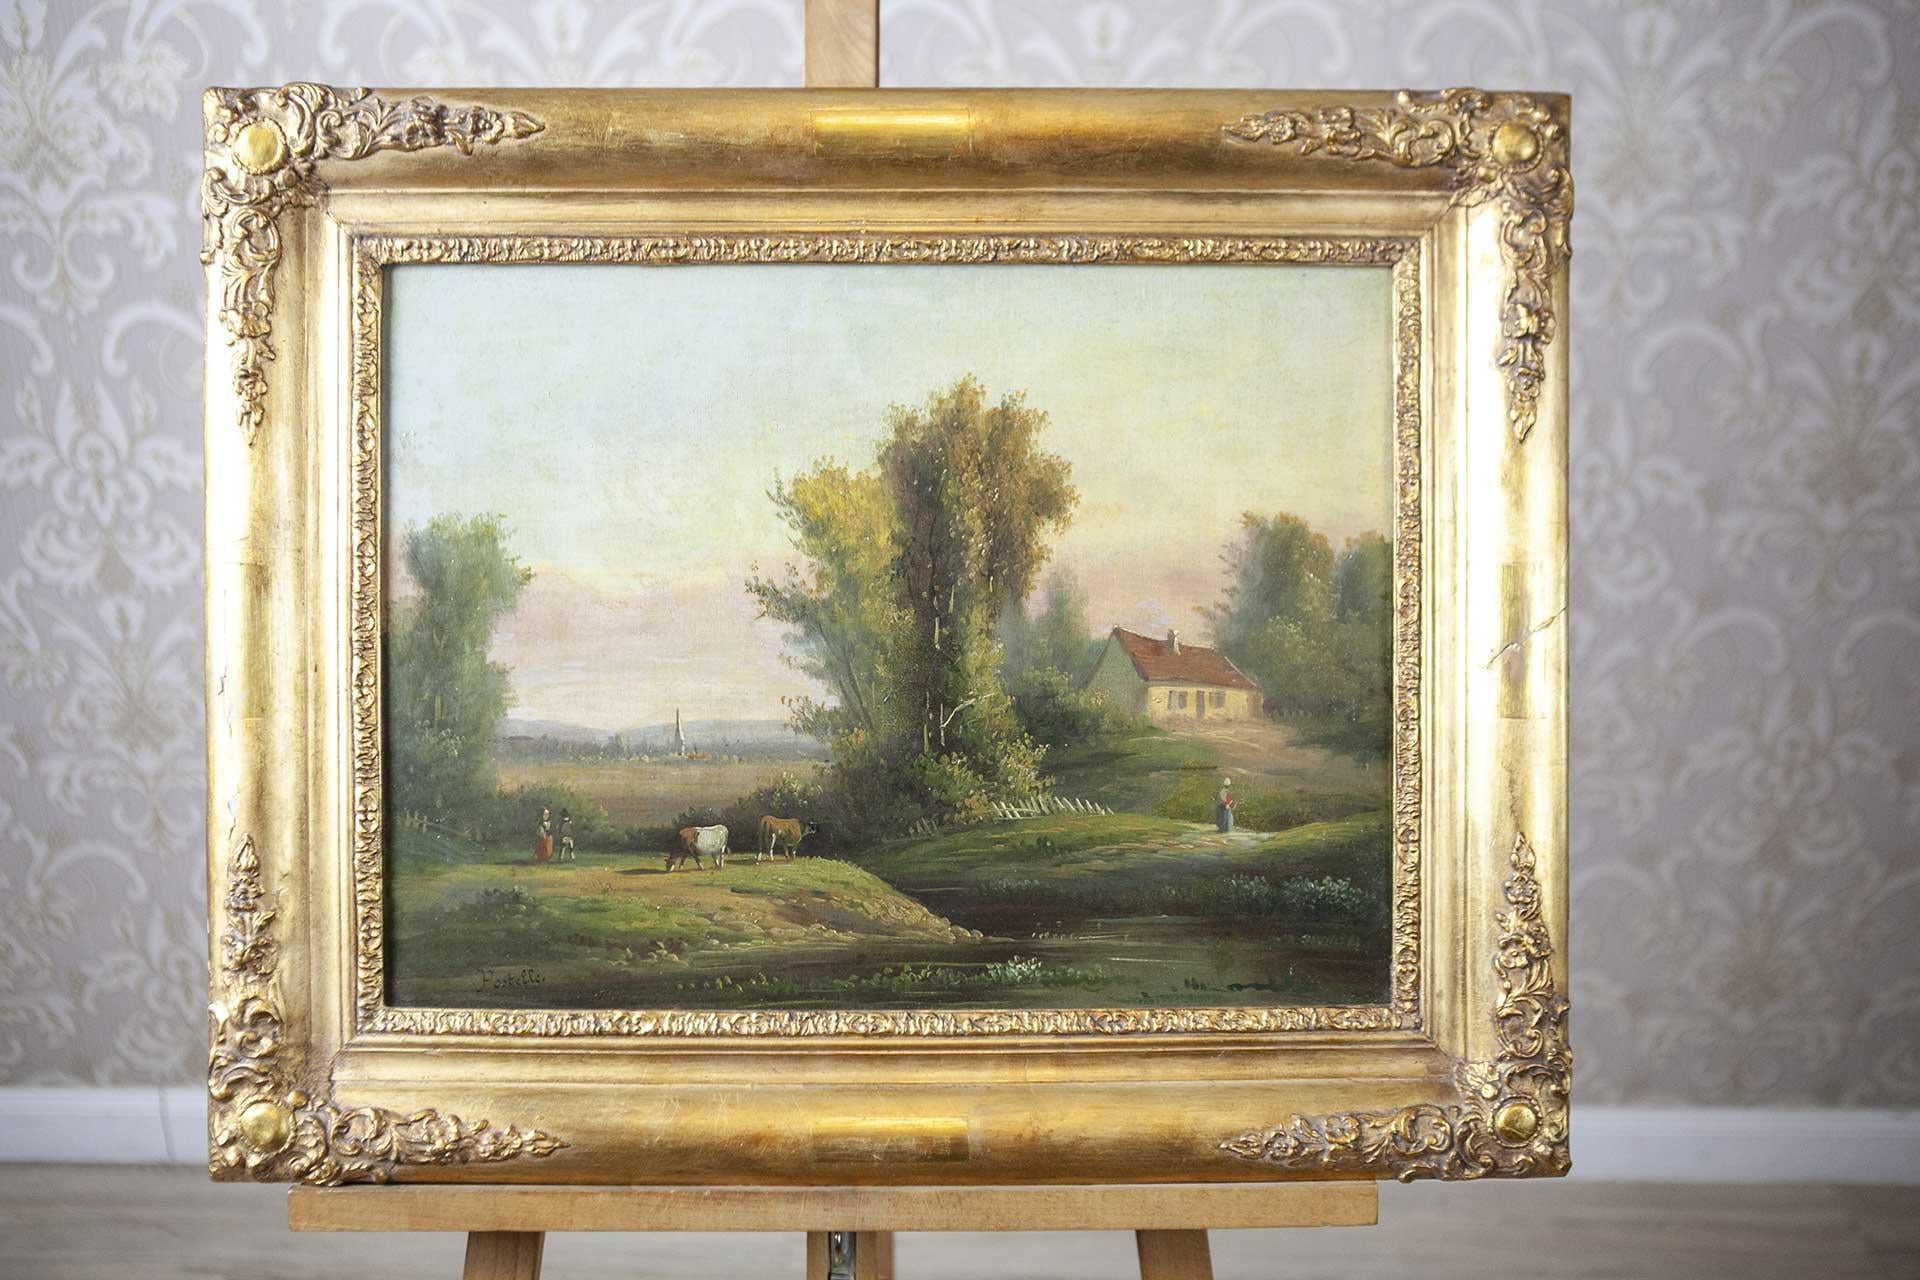 19th-Century Framed Oil on Canvas Depicting Village

We present you this oil on canvas depicting a landscape with a small house, people and animals. It is signed by Germain Postelle.

The painting is repainted, the lacquer is a bit yellowed.
The